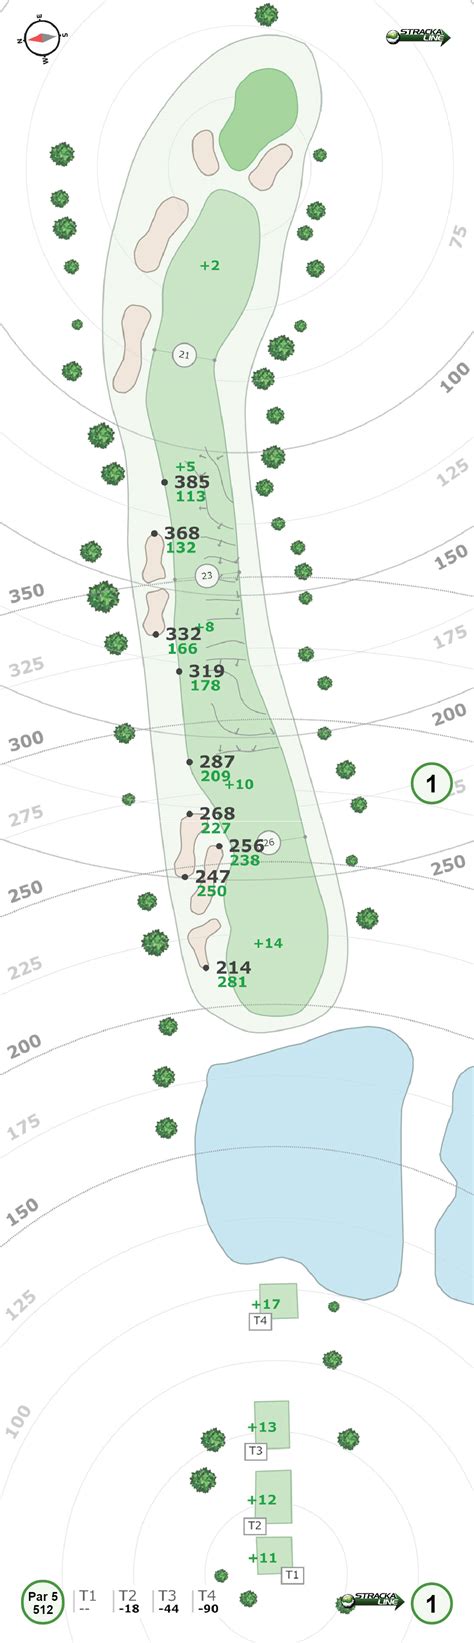 Yardage Book East Lake Golf Club For The Tour Championship